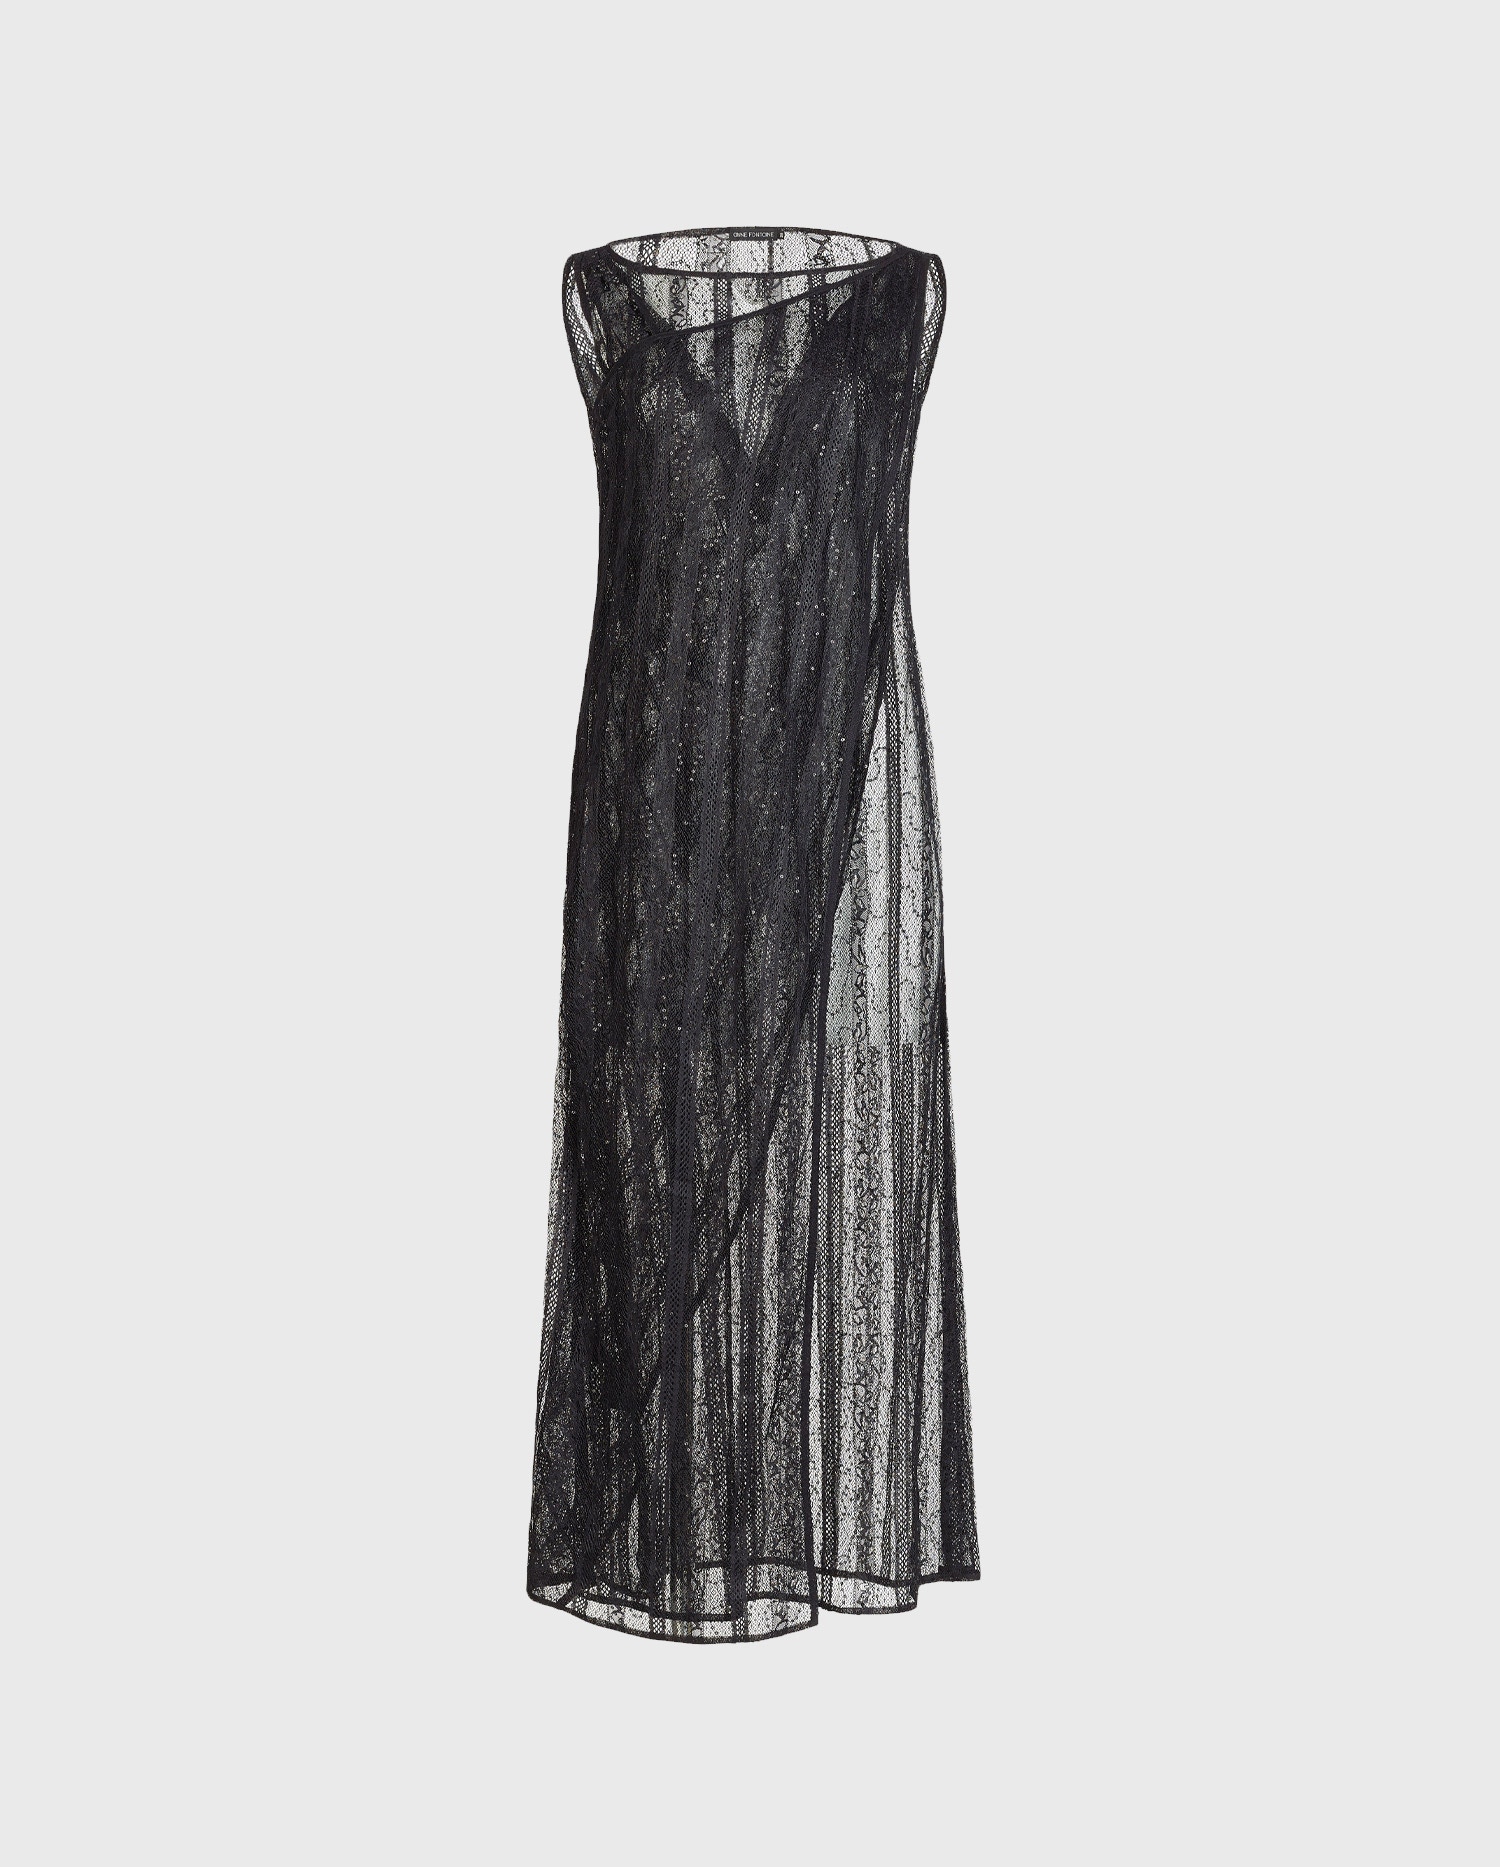 Discover the EMOTION Sleeveless sheer lace Long dress with vertical lattice detail and tonal sequins from ANNE FONTAINE